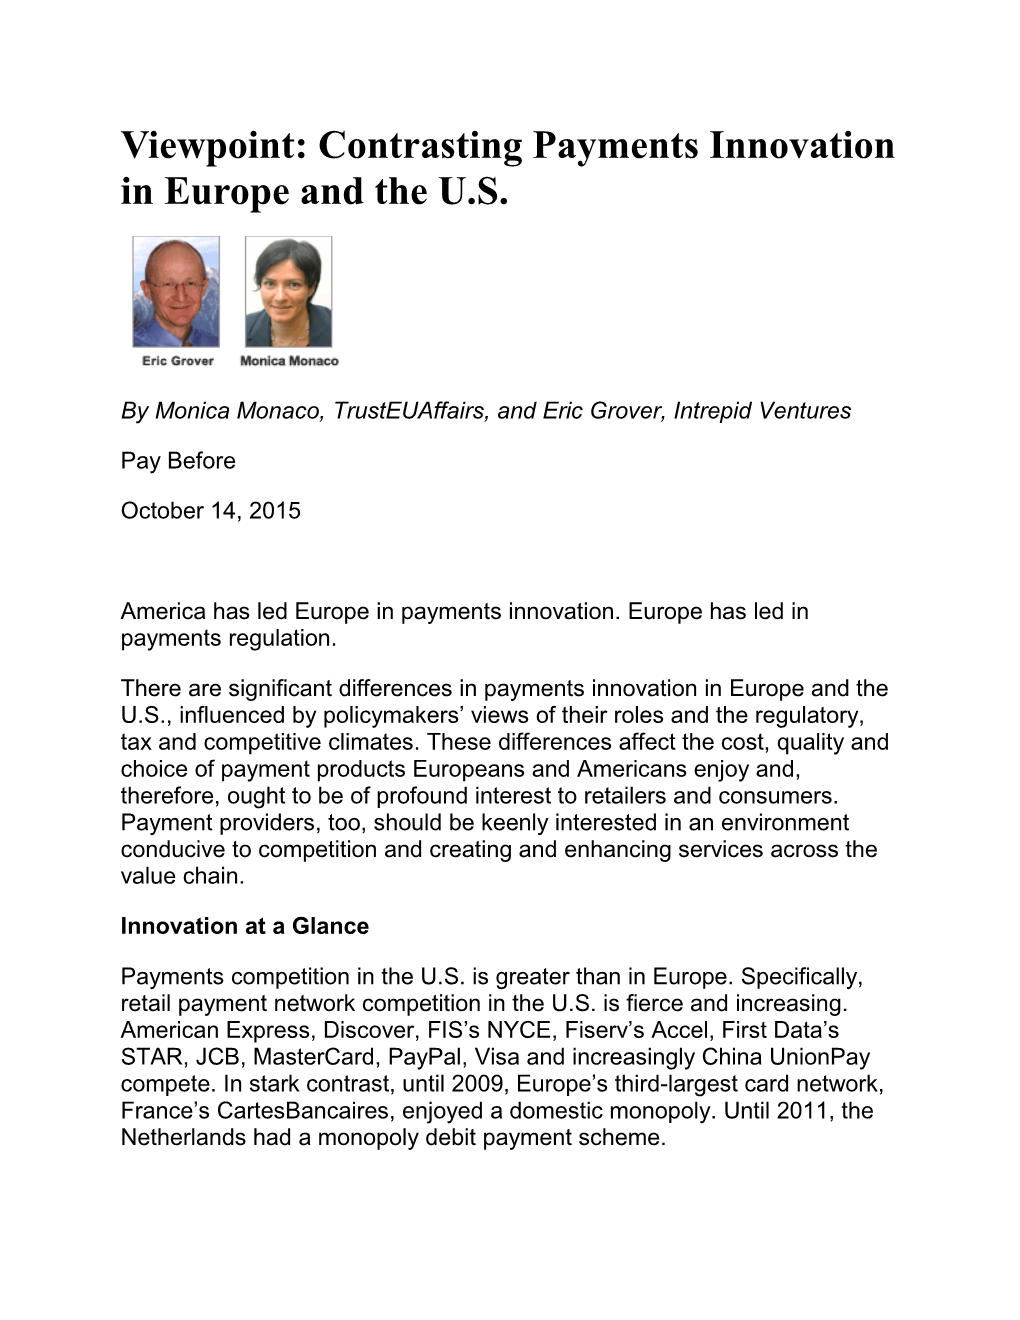 Viewpoint: Contrasting Payments Innovation in Europe and the U.S